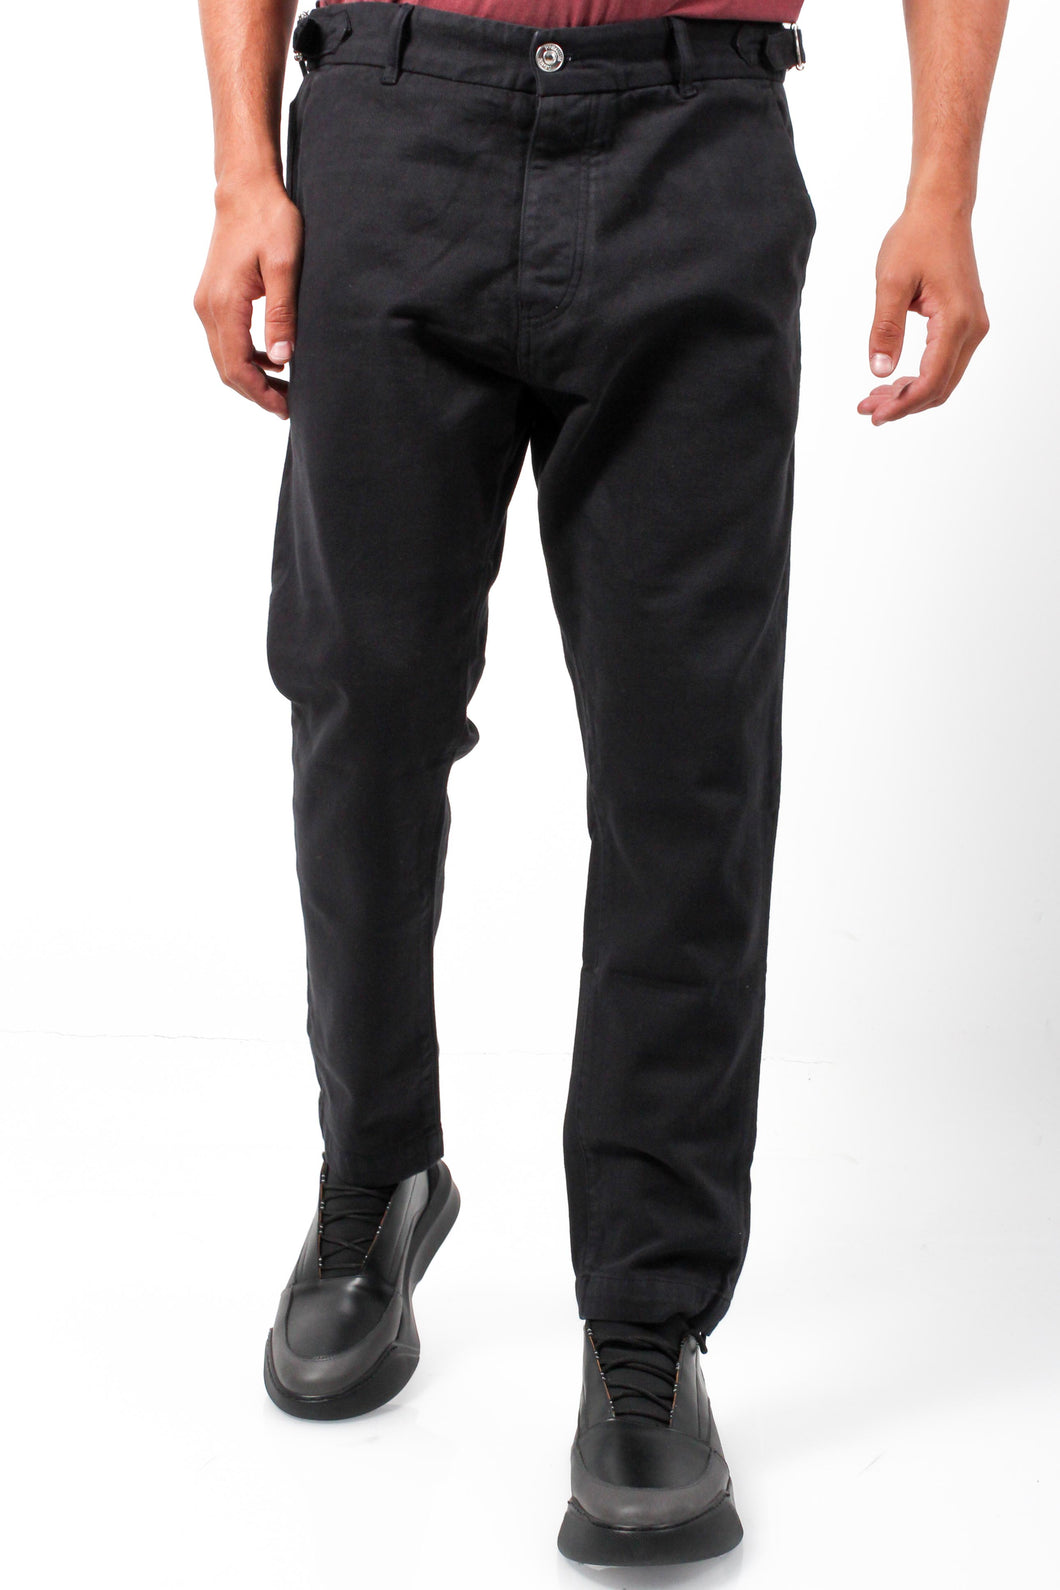 TROUSERS RIBE ST-2031